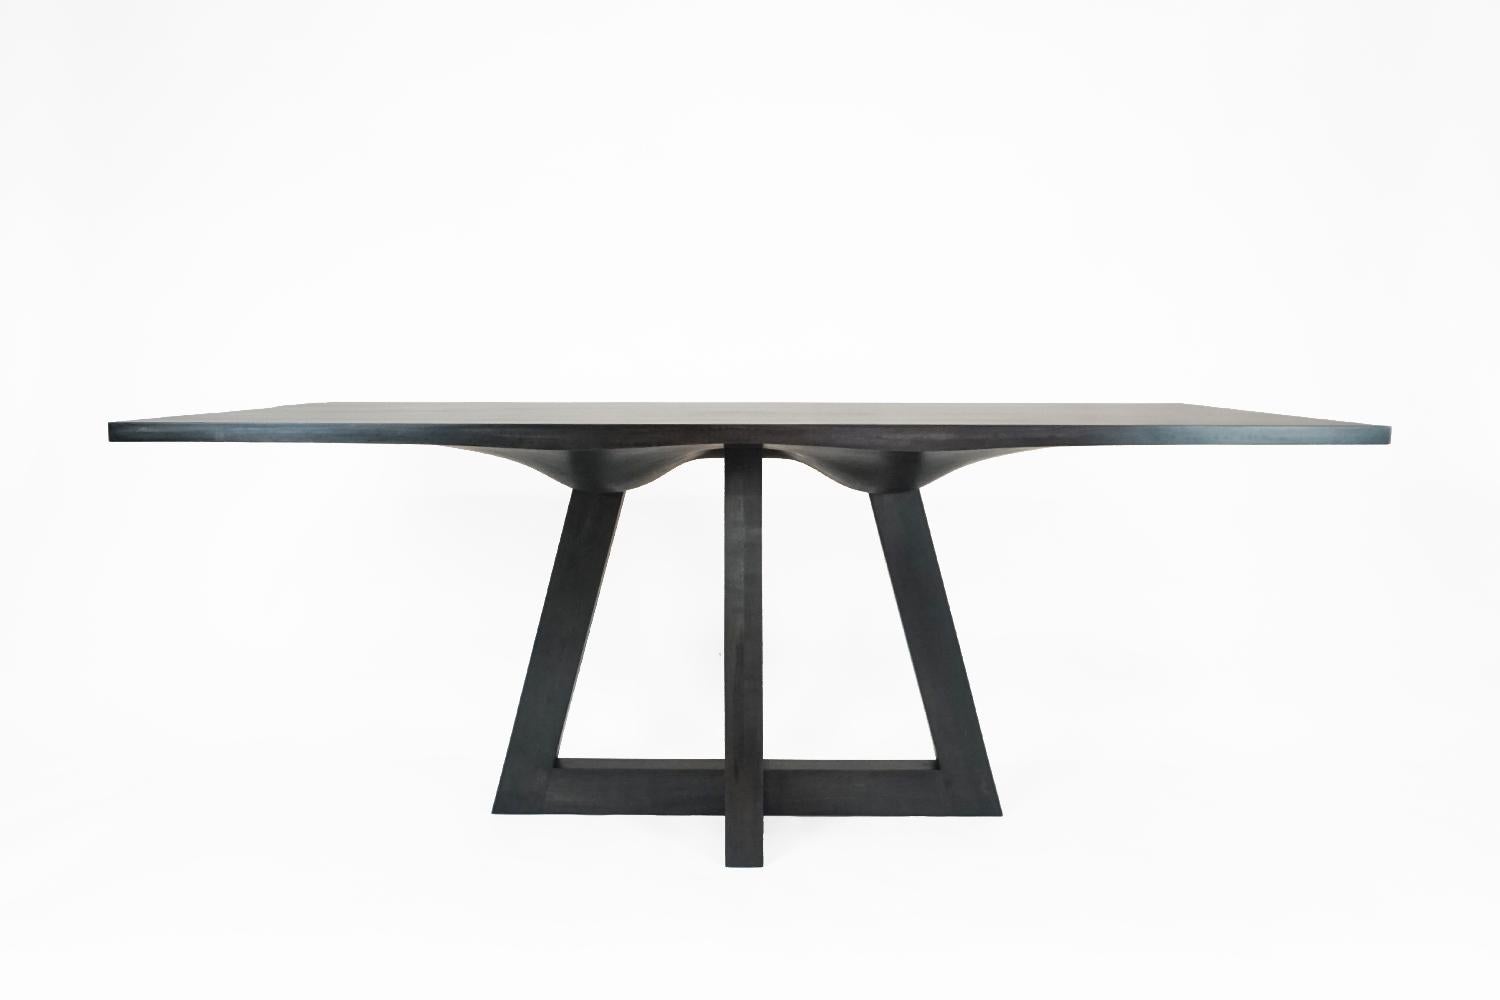 Ebonized dining table by Vincent Pocsik

Vincent’s work balances old and new fabrication techniques to breathe new life into materials while holding onto the richness of the past. This process is influenced by the desire to push the traditional